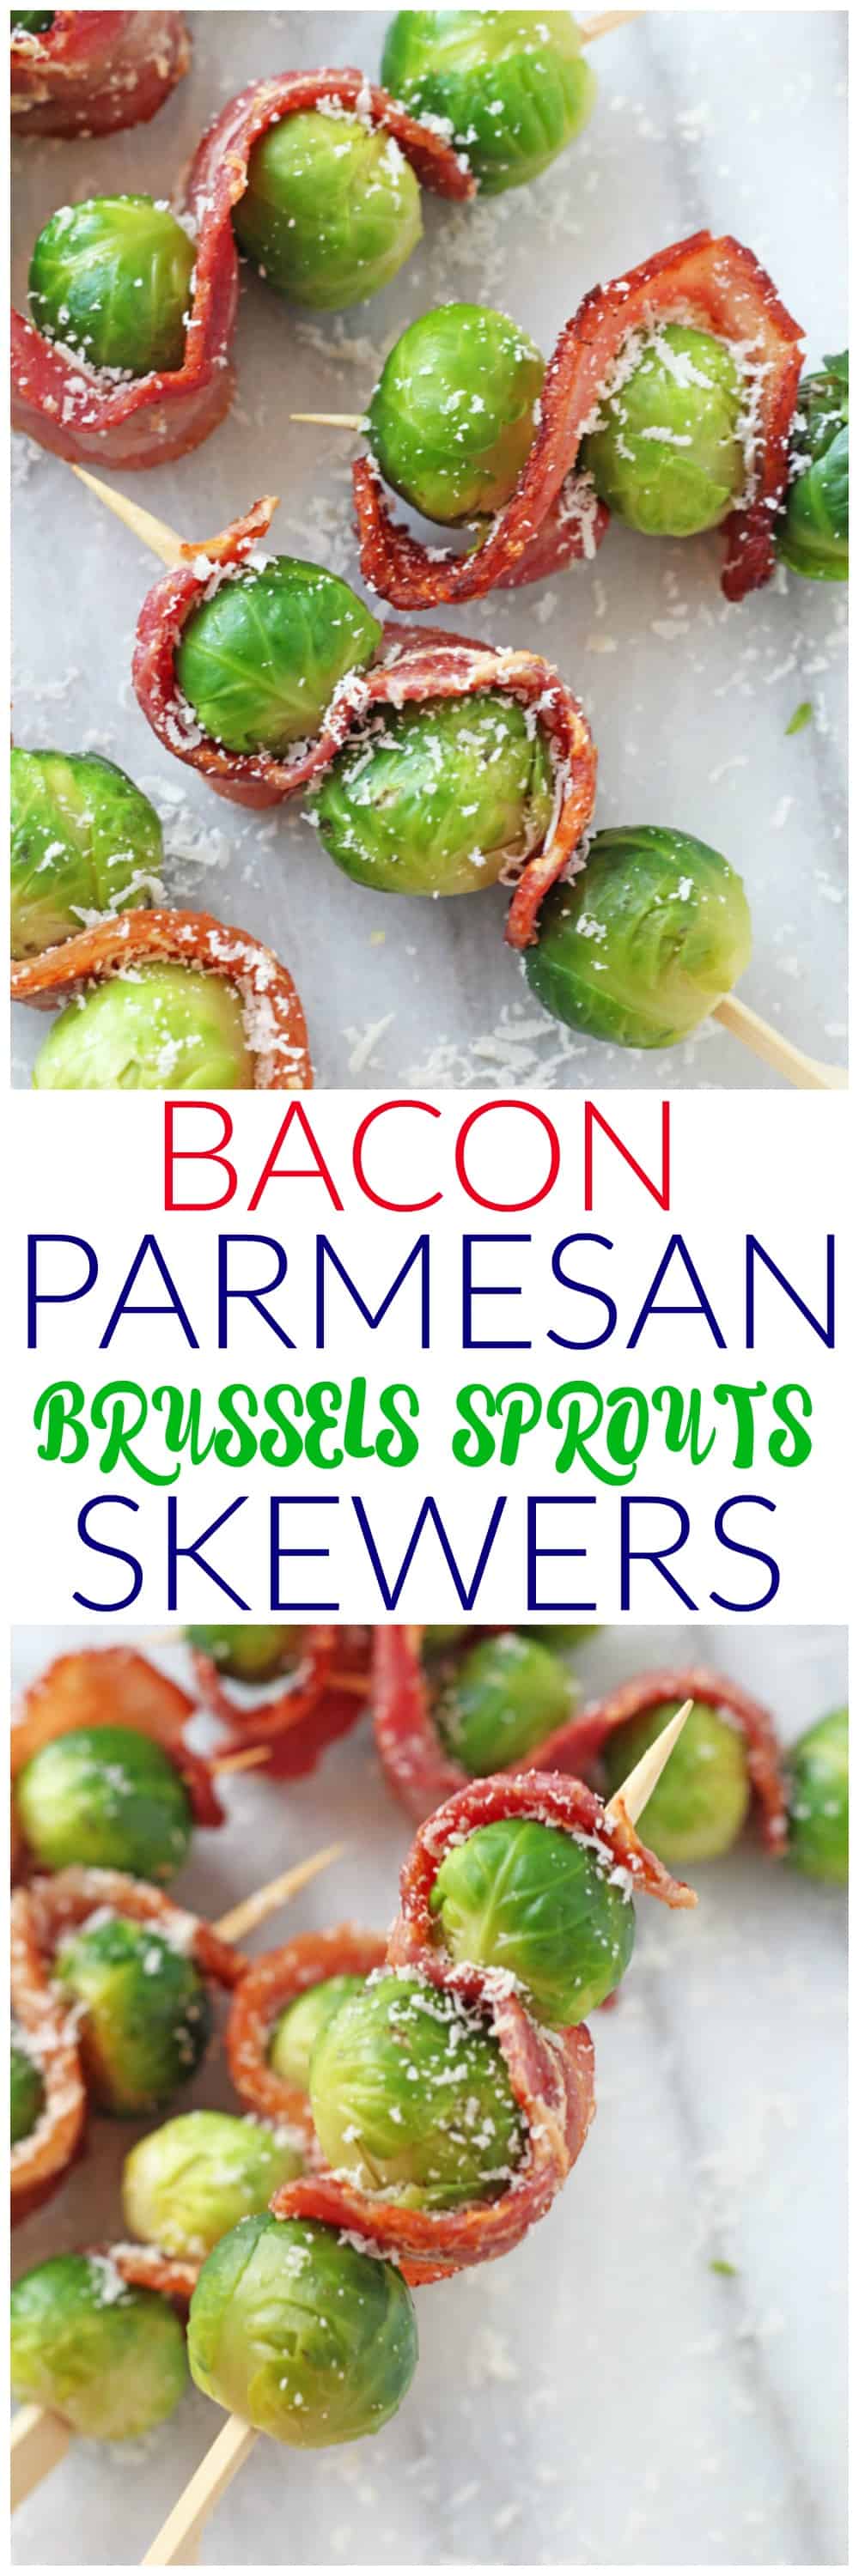 Bacon & Parmesan Brussels Sprout Skewers Pinterest Pin